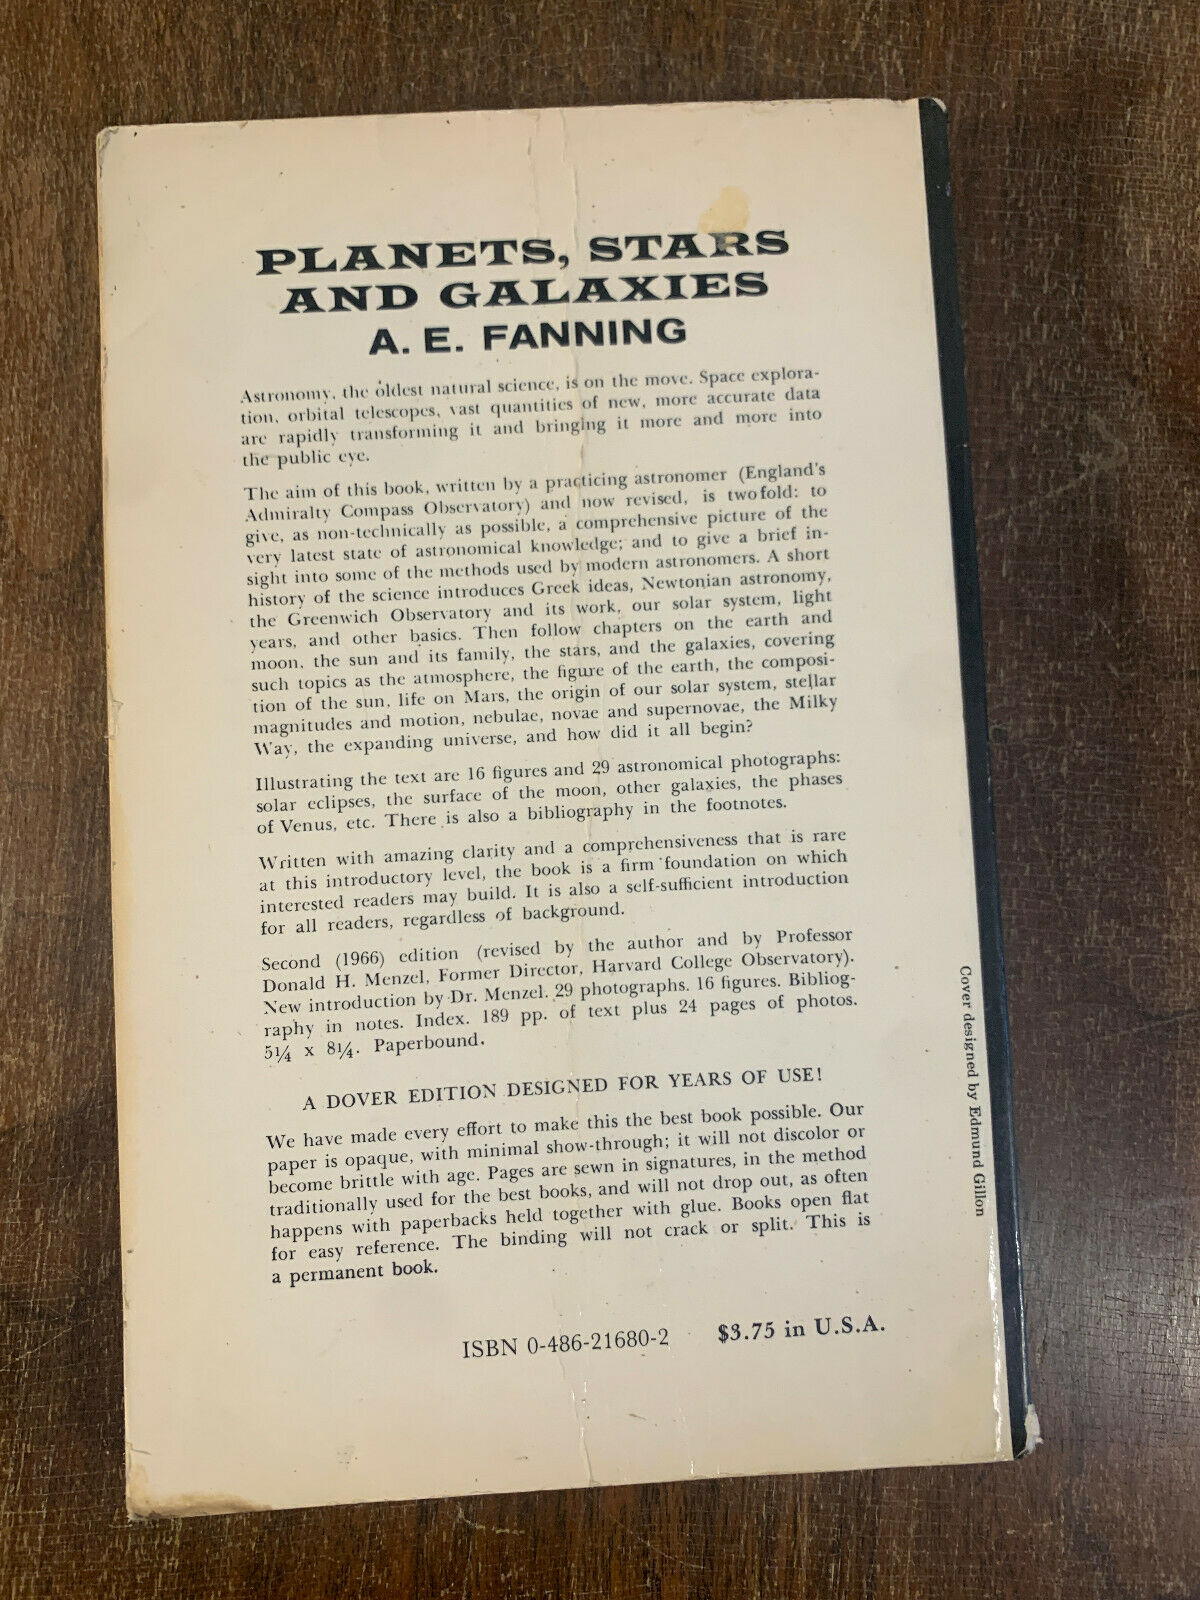 Planets, Stars And Galaxies Descriptive Astronomy by A.E. Fanning (HS4)